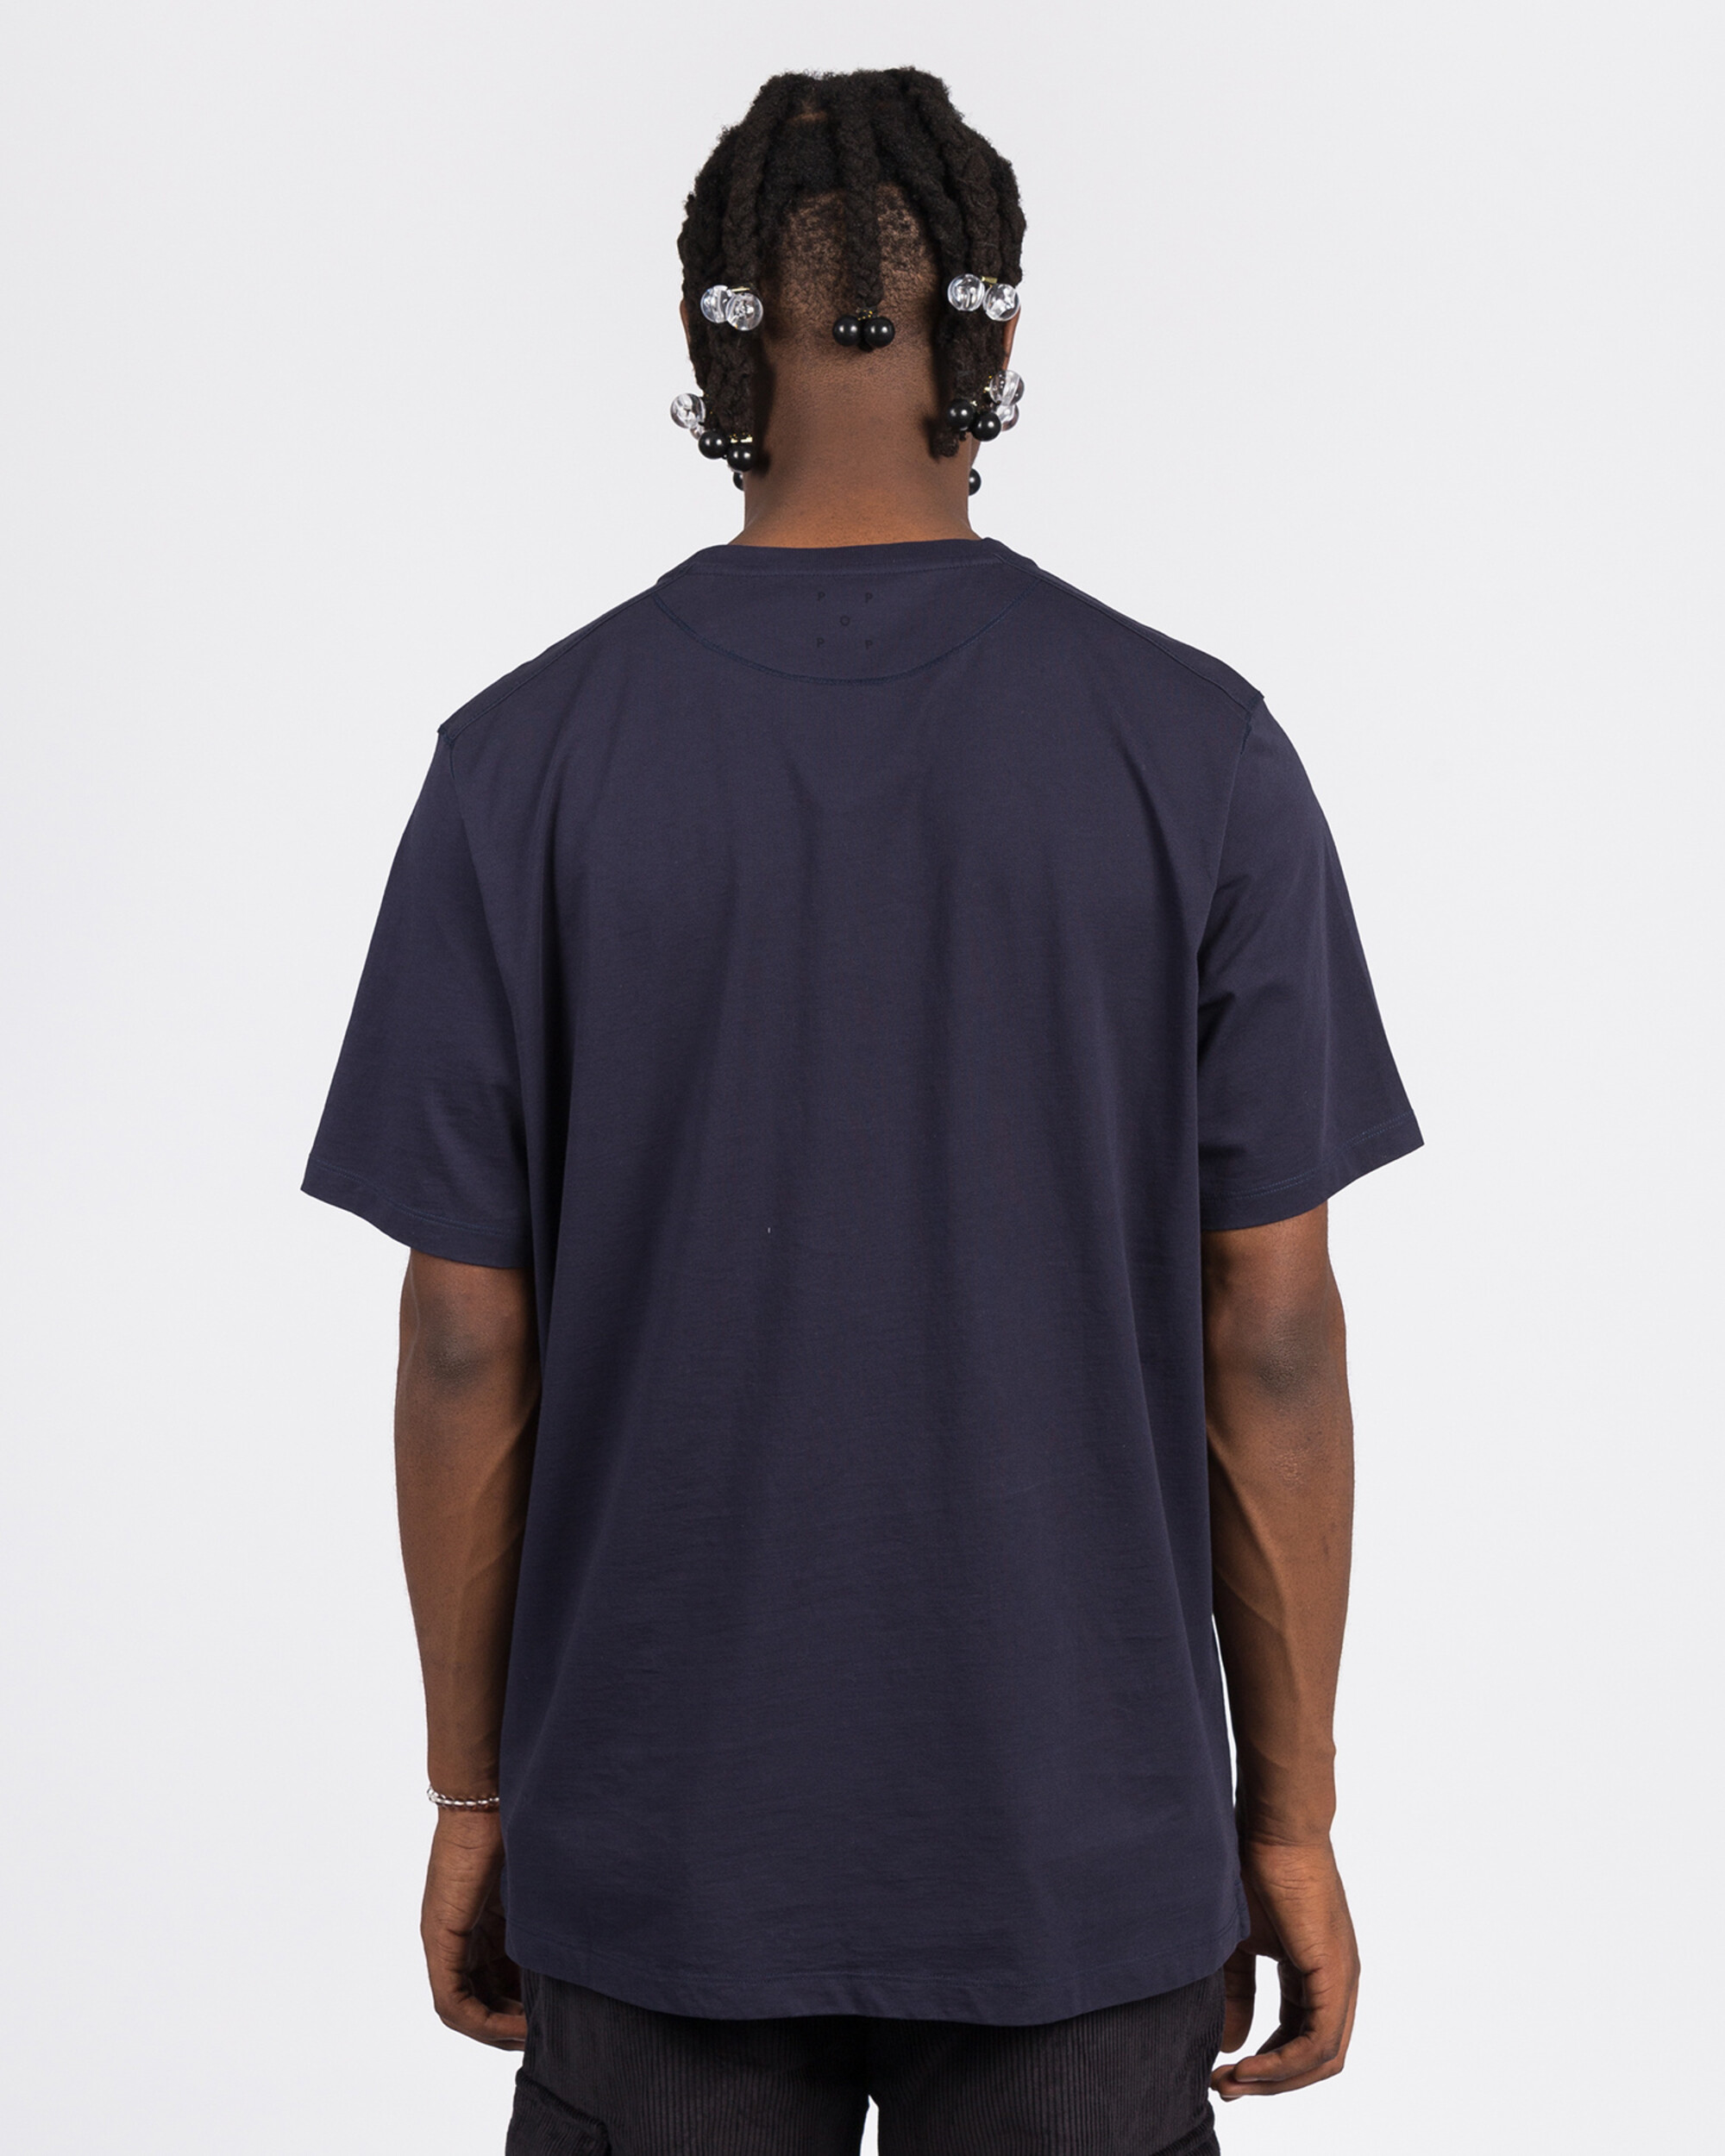 Pop Trading Co le t-shirt navy